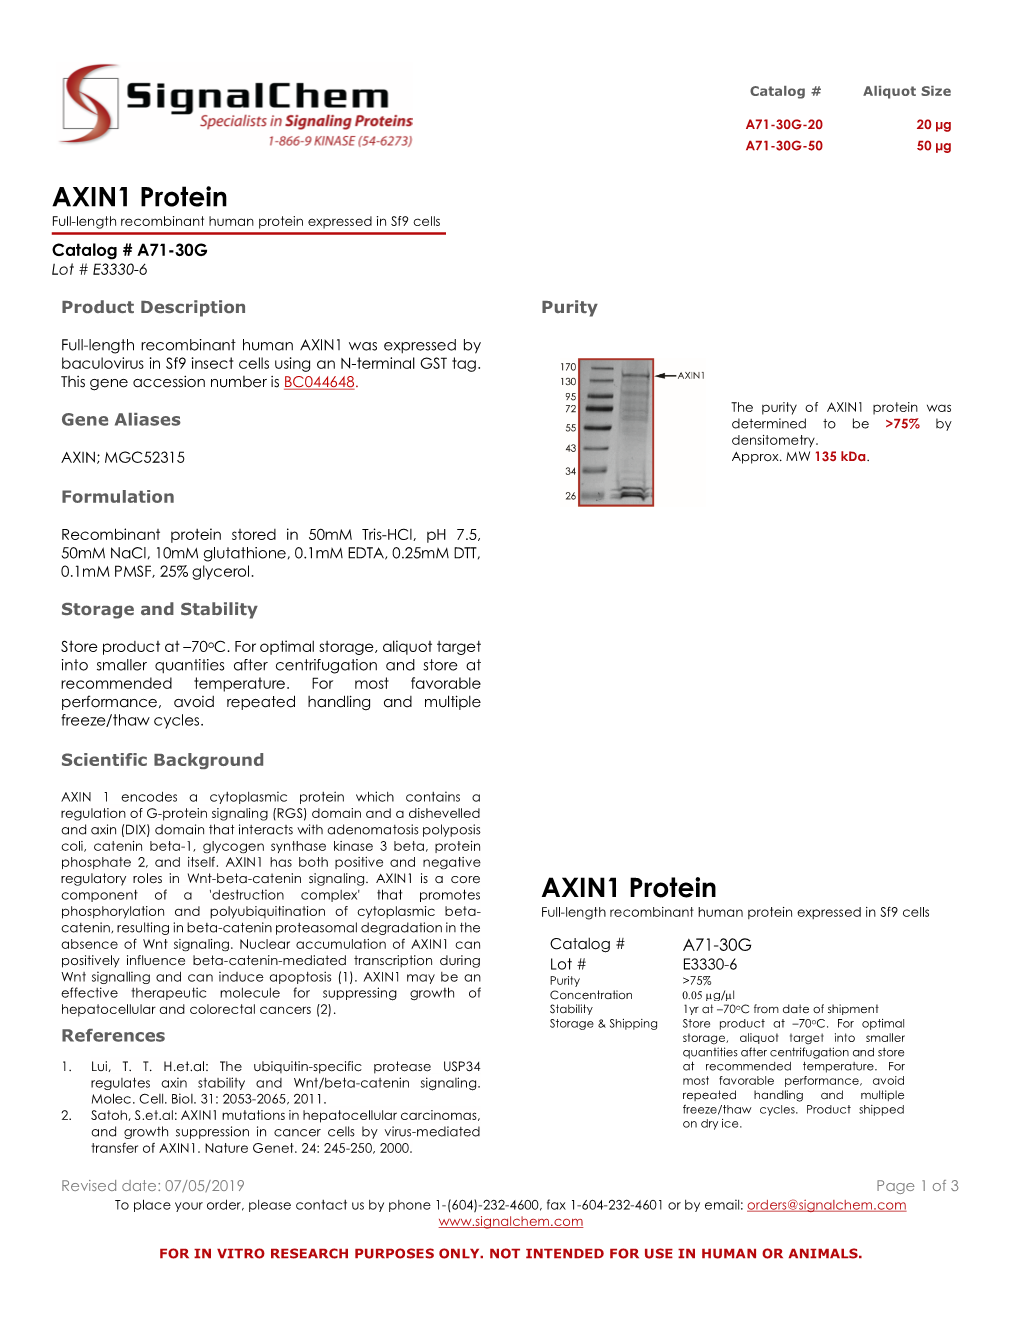 AXIN1 Protein Full-Length Recombinant Human Protein Expressed in Sf9 Cells